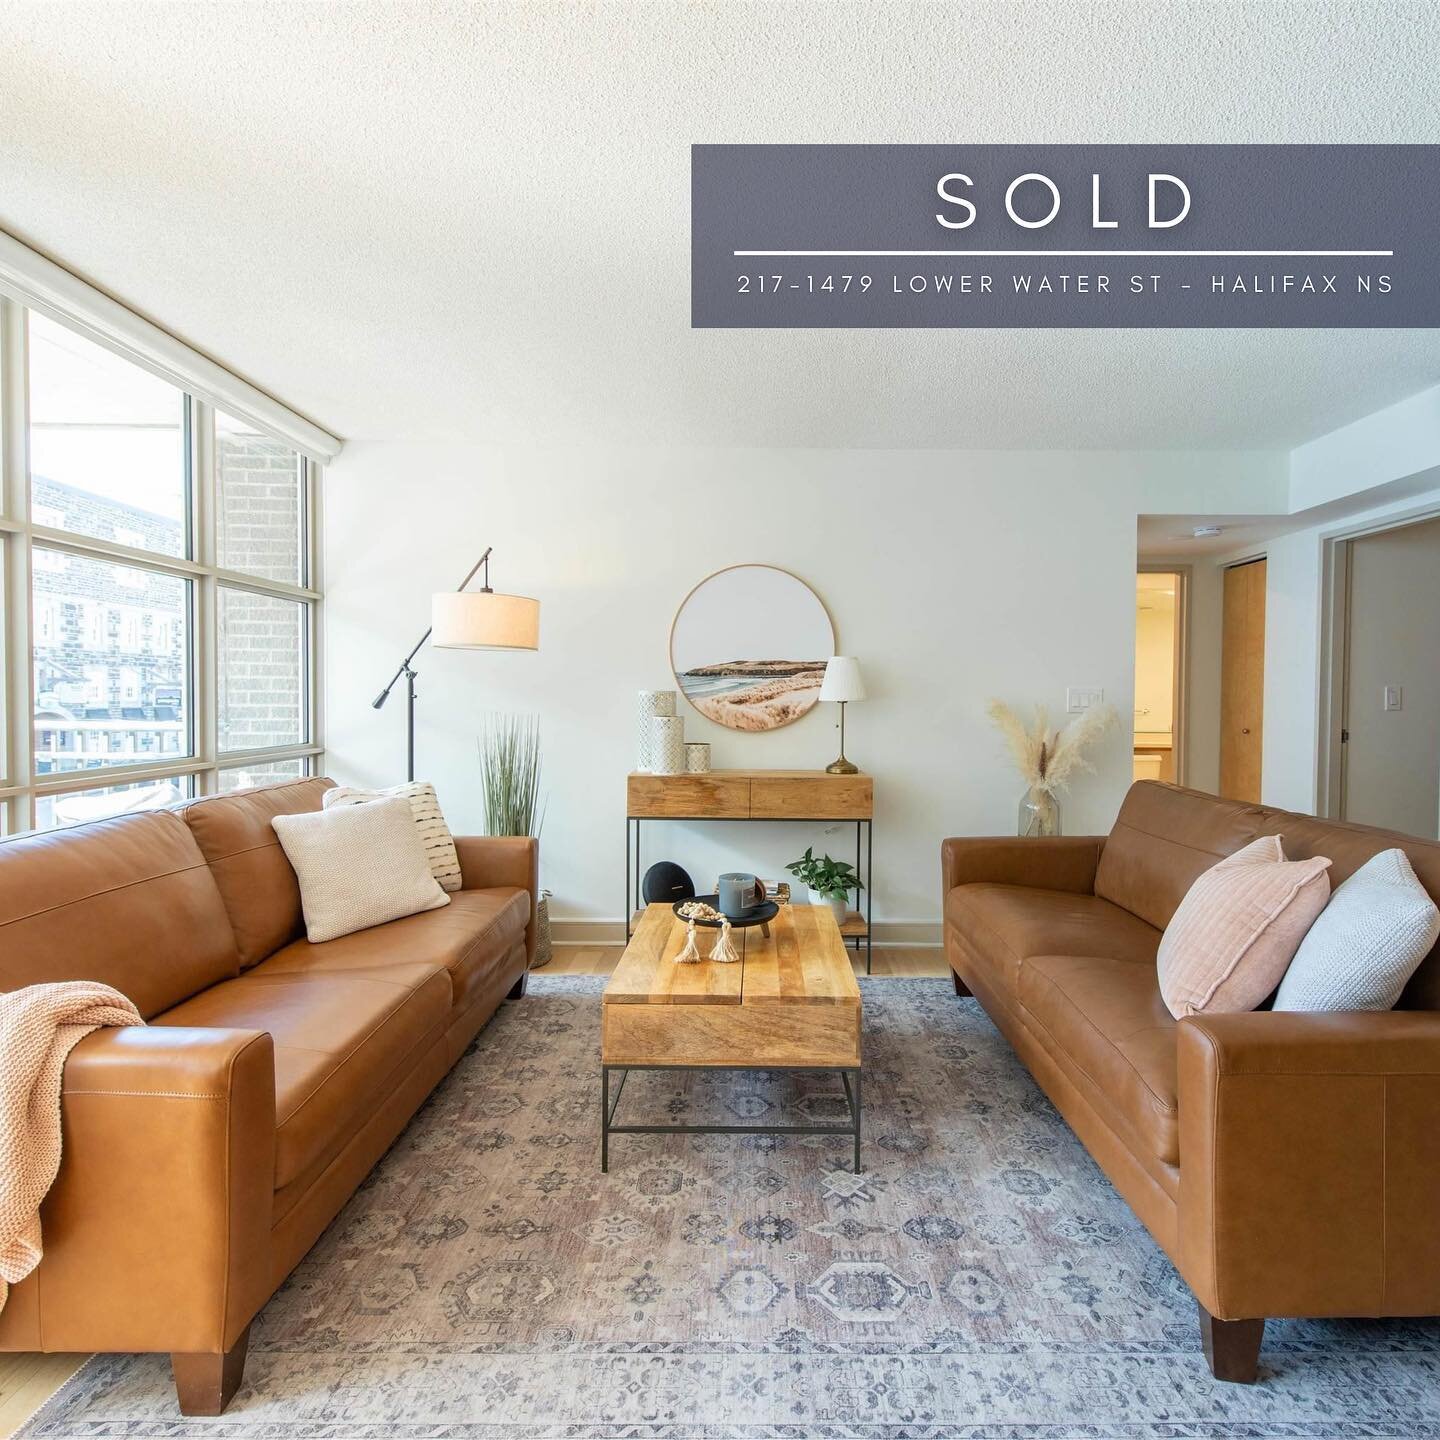 S O L D
______________________

It&rsquo;s not only phenomenal to work with clients to buy into my neighbourhood but also to work with @katiesellshalifax on the other side of the deal 🤝 thank you for bringing this beautiful space to market!

Congrat